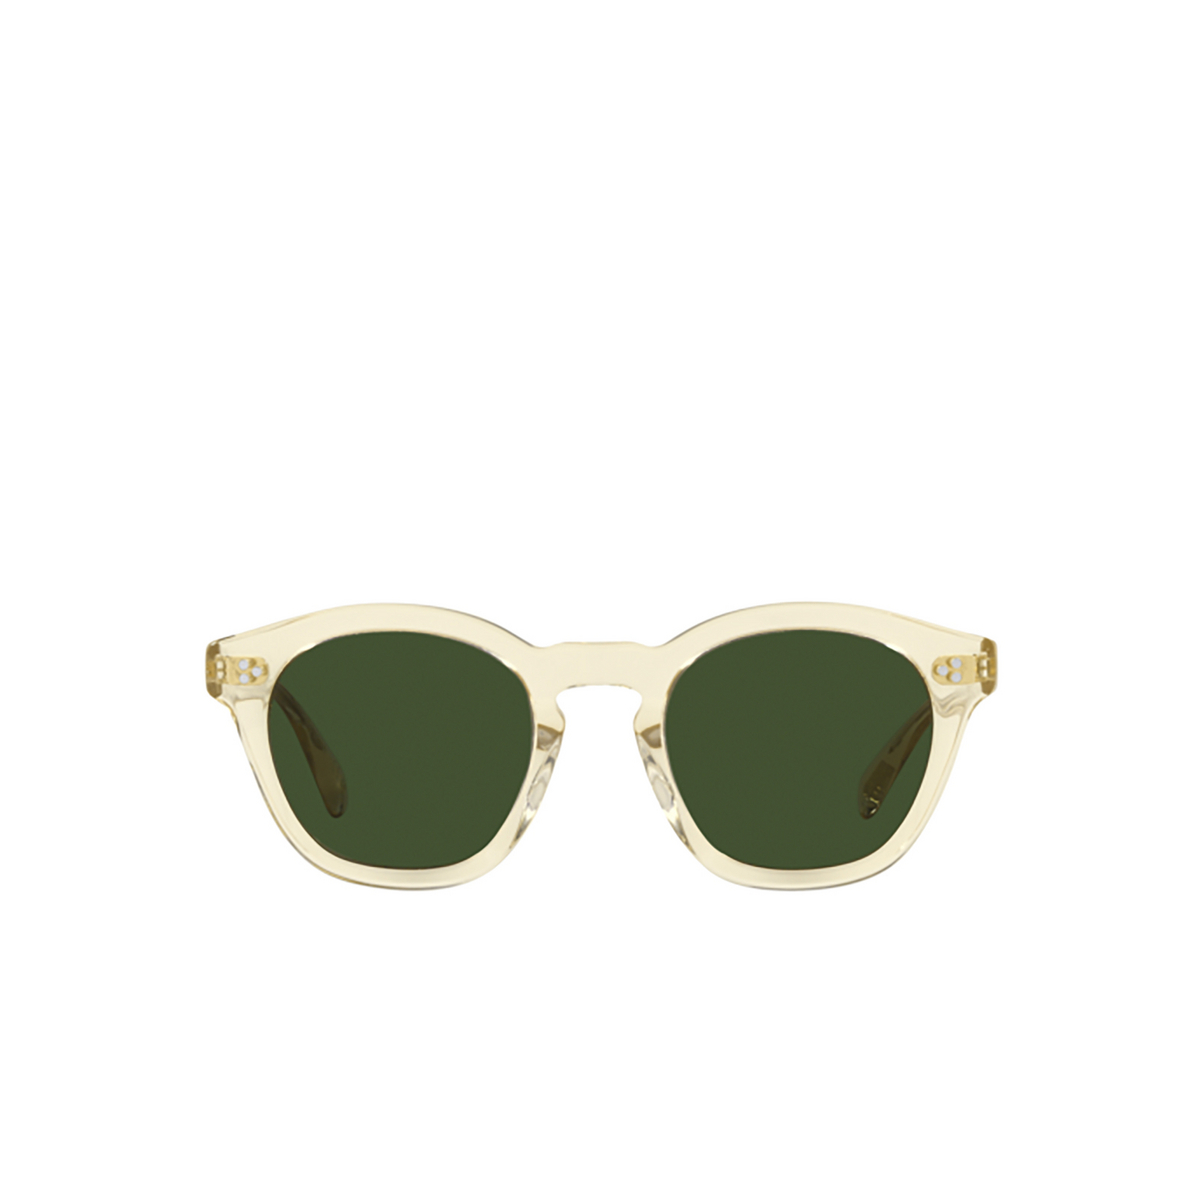 Oliver Peoples BOUDREAU L.A Sunglasses 109471 Buff - front view